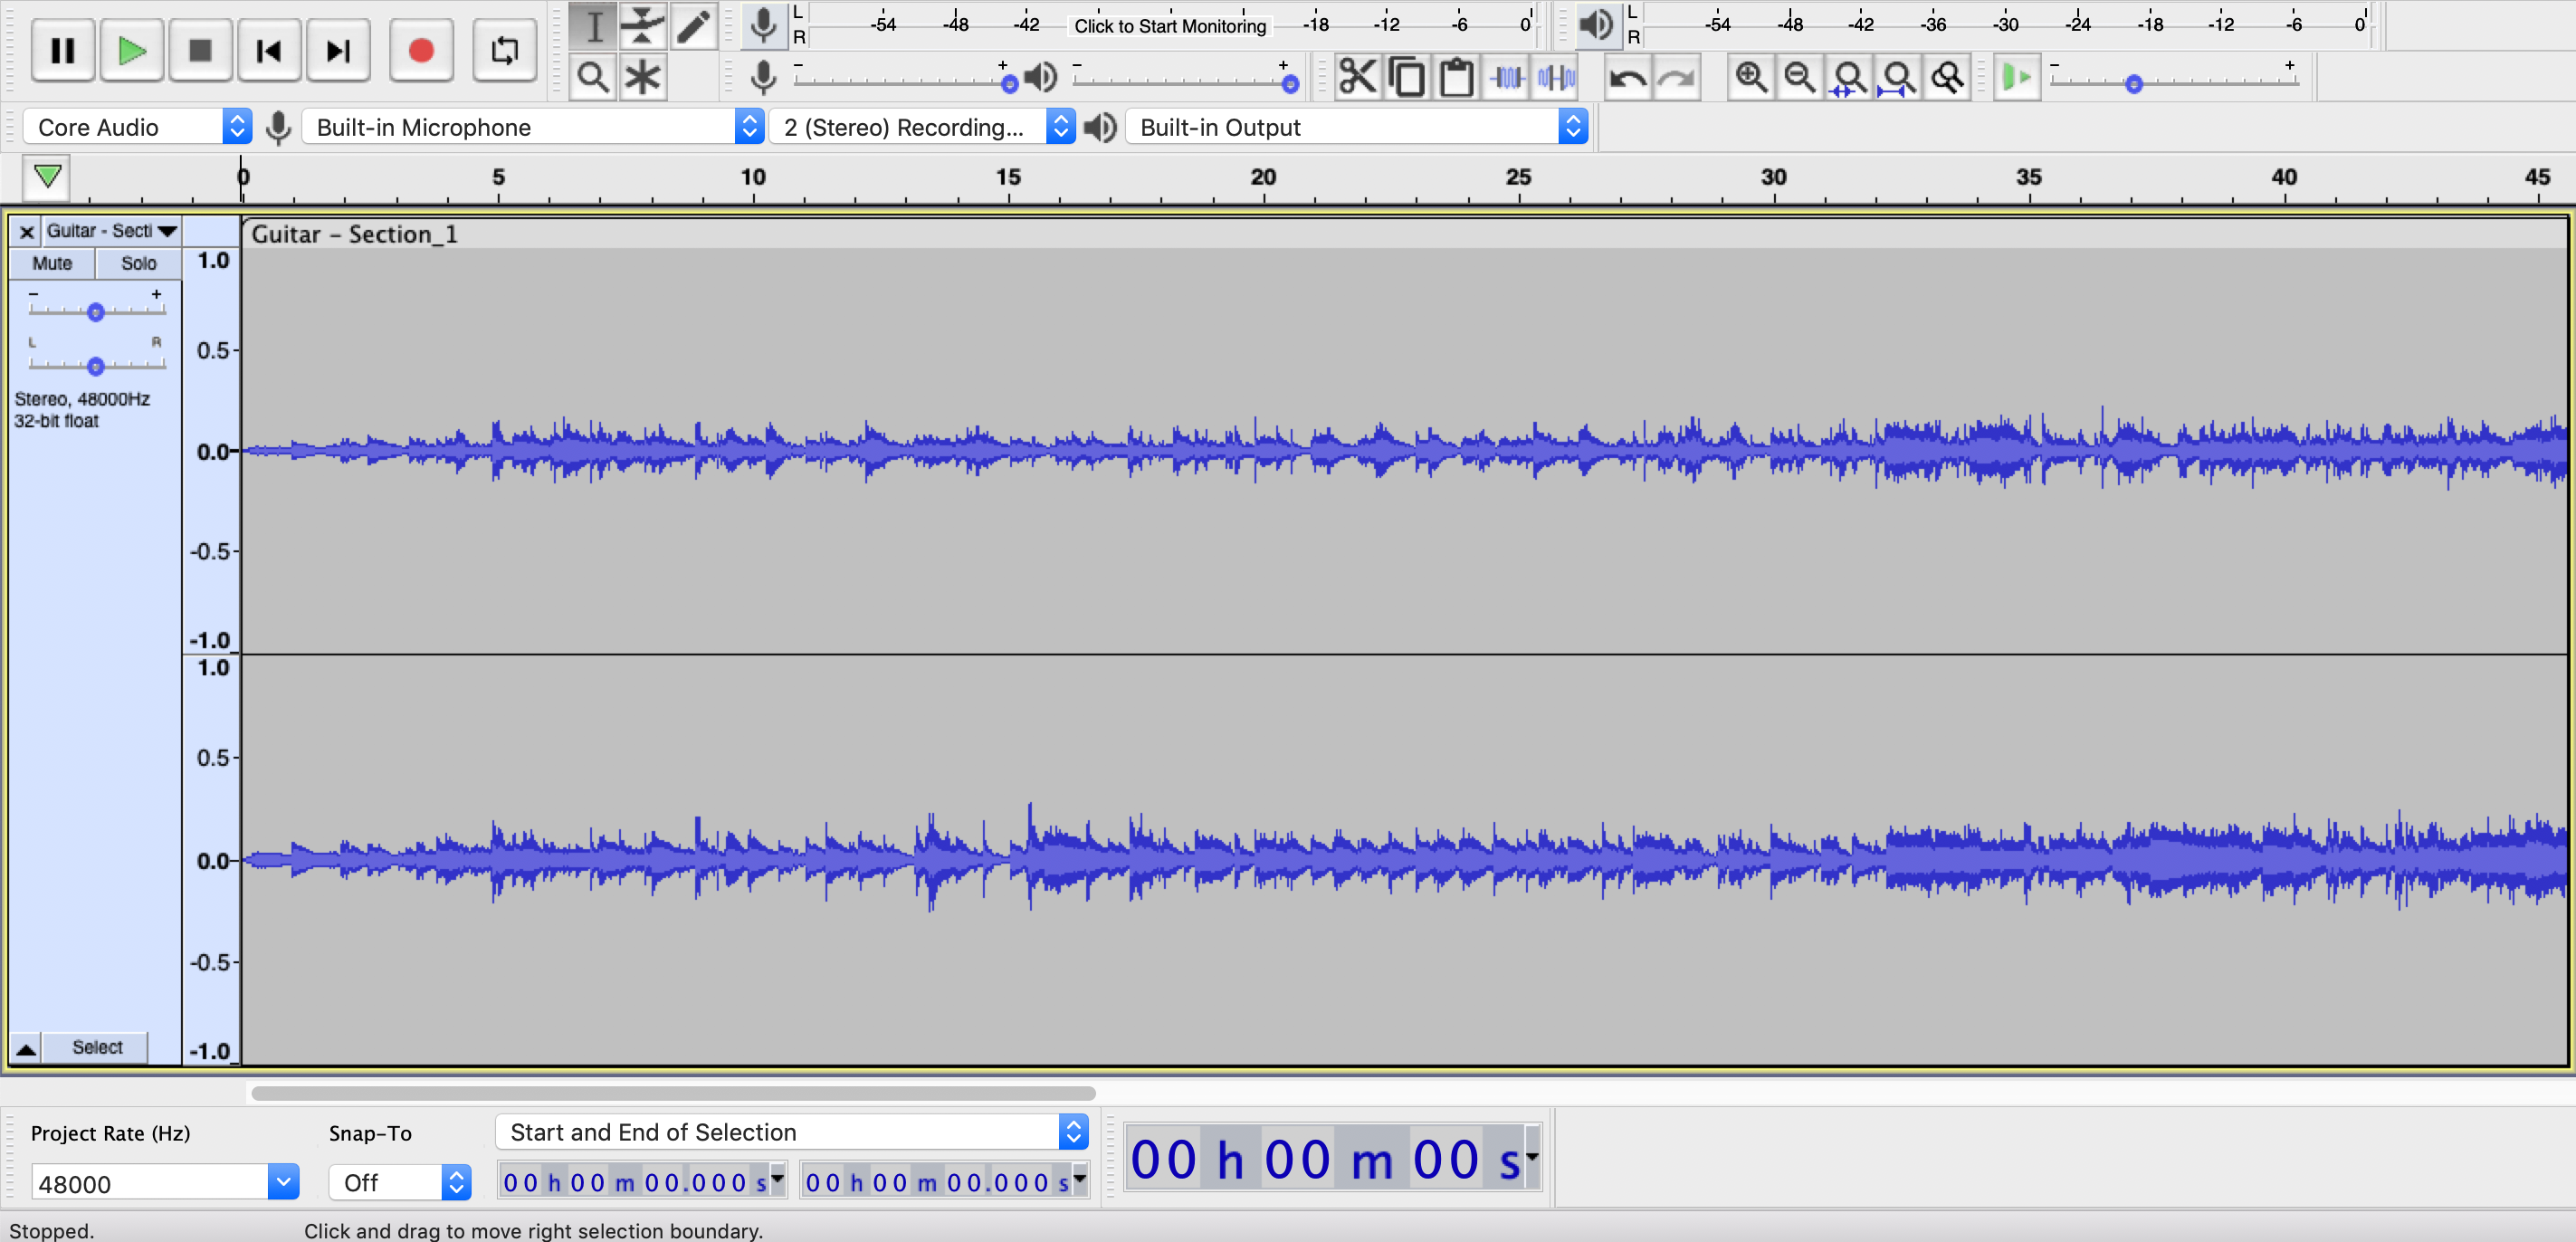 A screenshot of the default interface for Audacity, a music production software